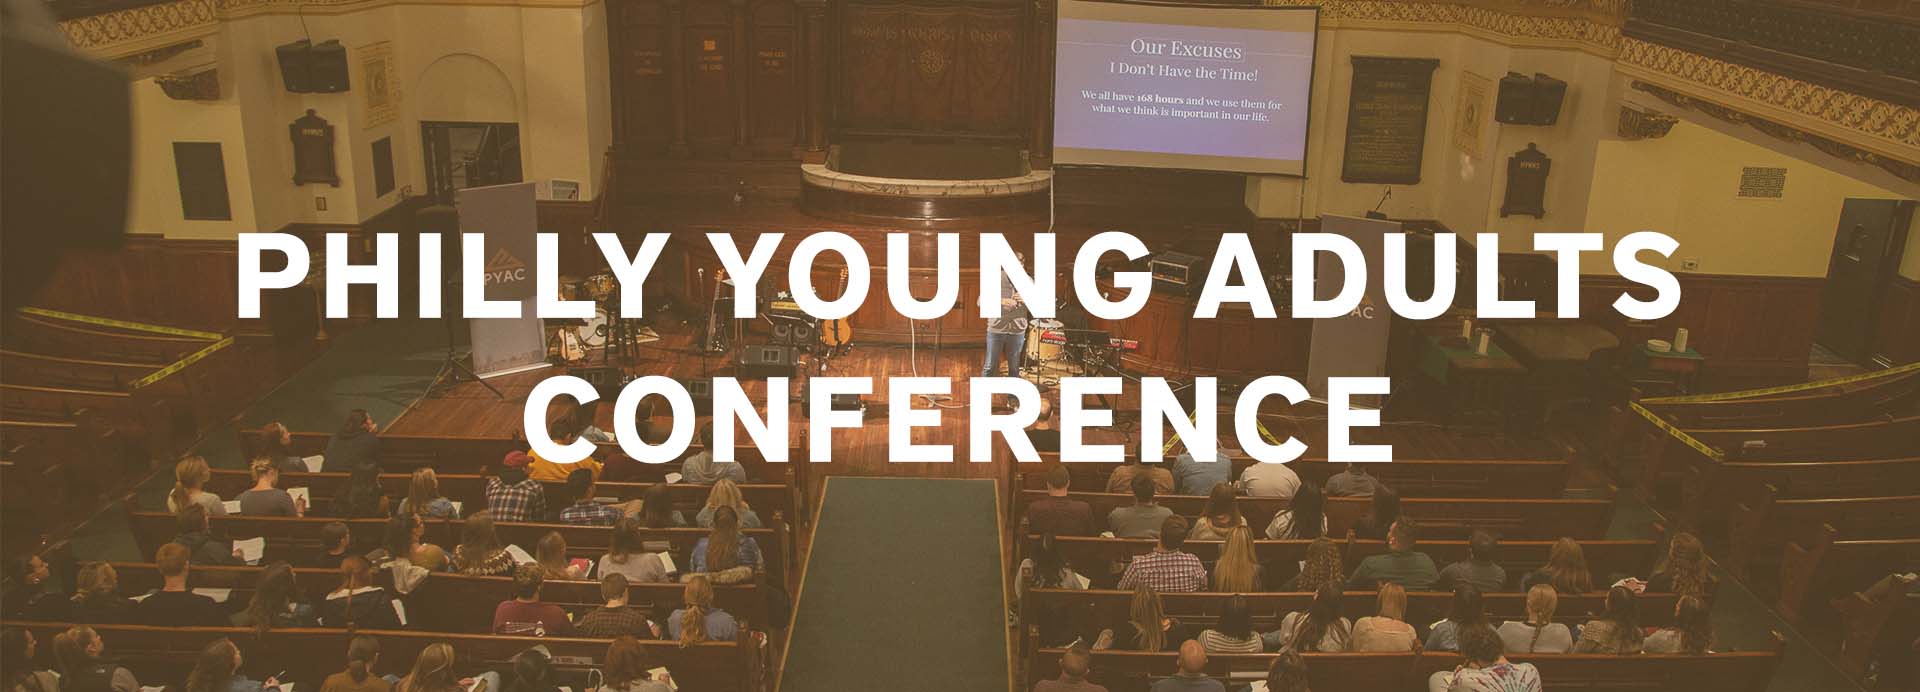 Philly Young Adults Conference 2019